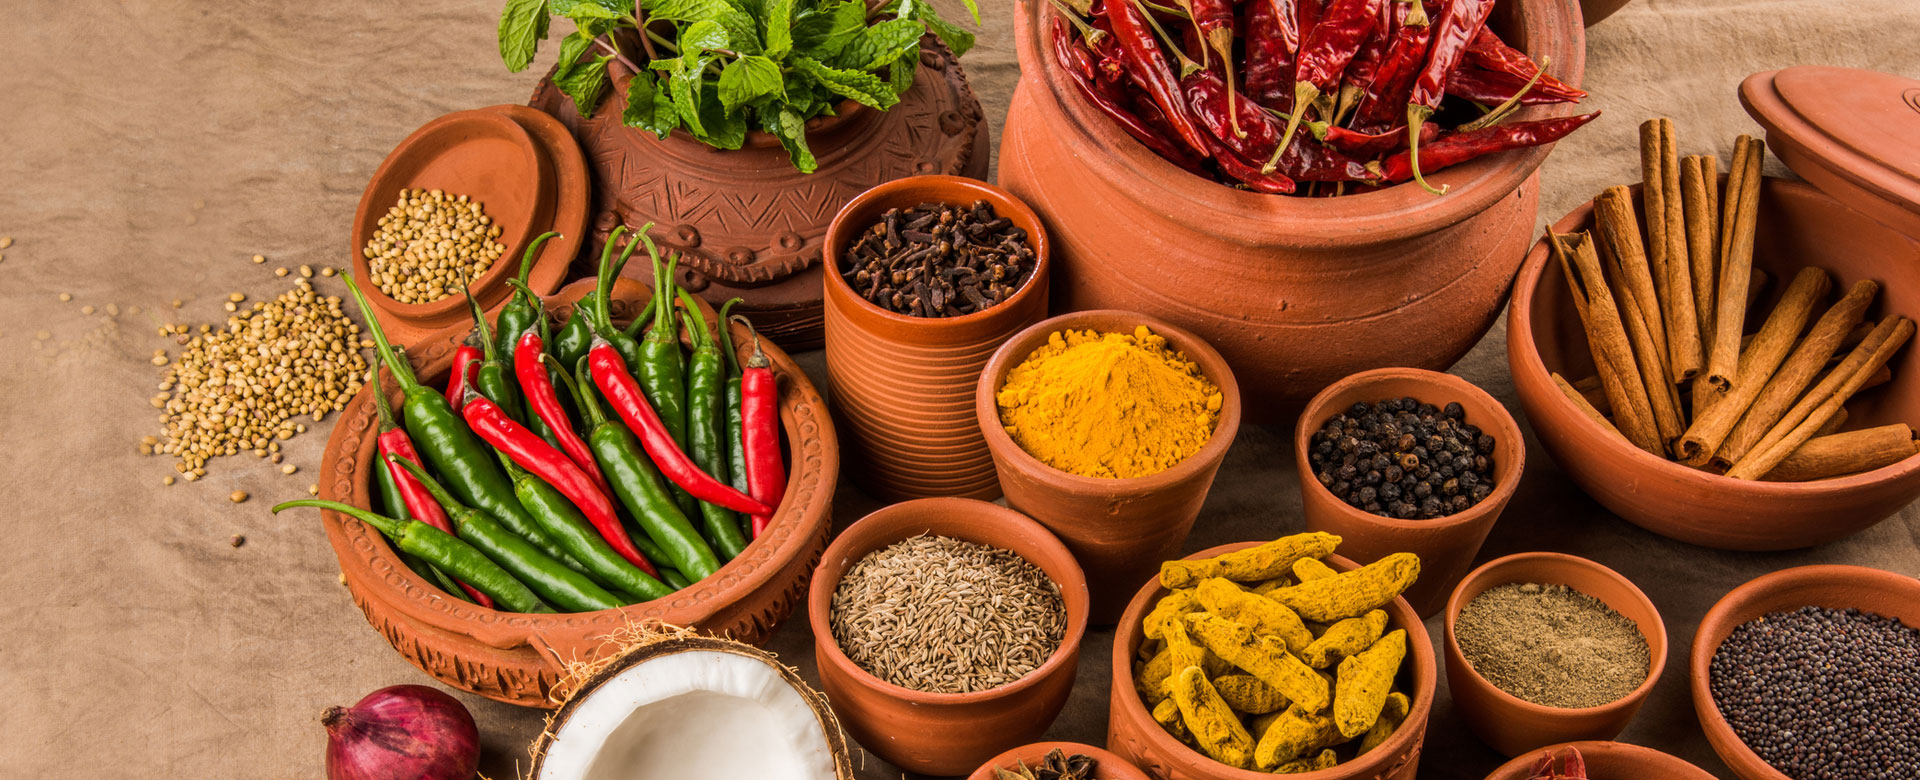 best place to buy spices online, buy indian spices online, Indian Spices Manufacturers, Spices Manufacturers in India, Spices Suppliers in India, red chilli powder, red chilli supplier from India, whole chilli supplier from India,